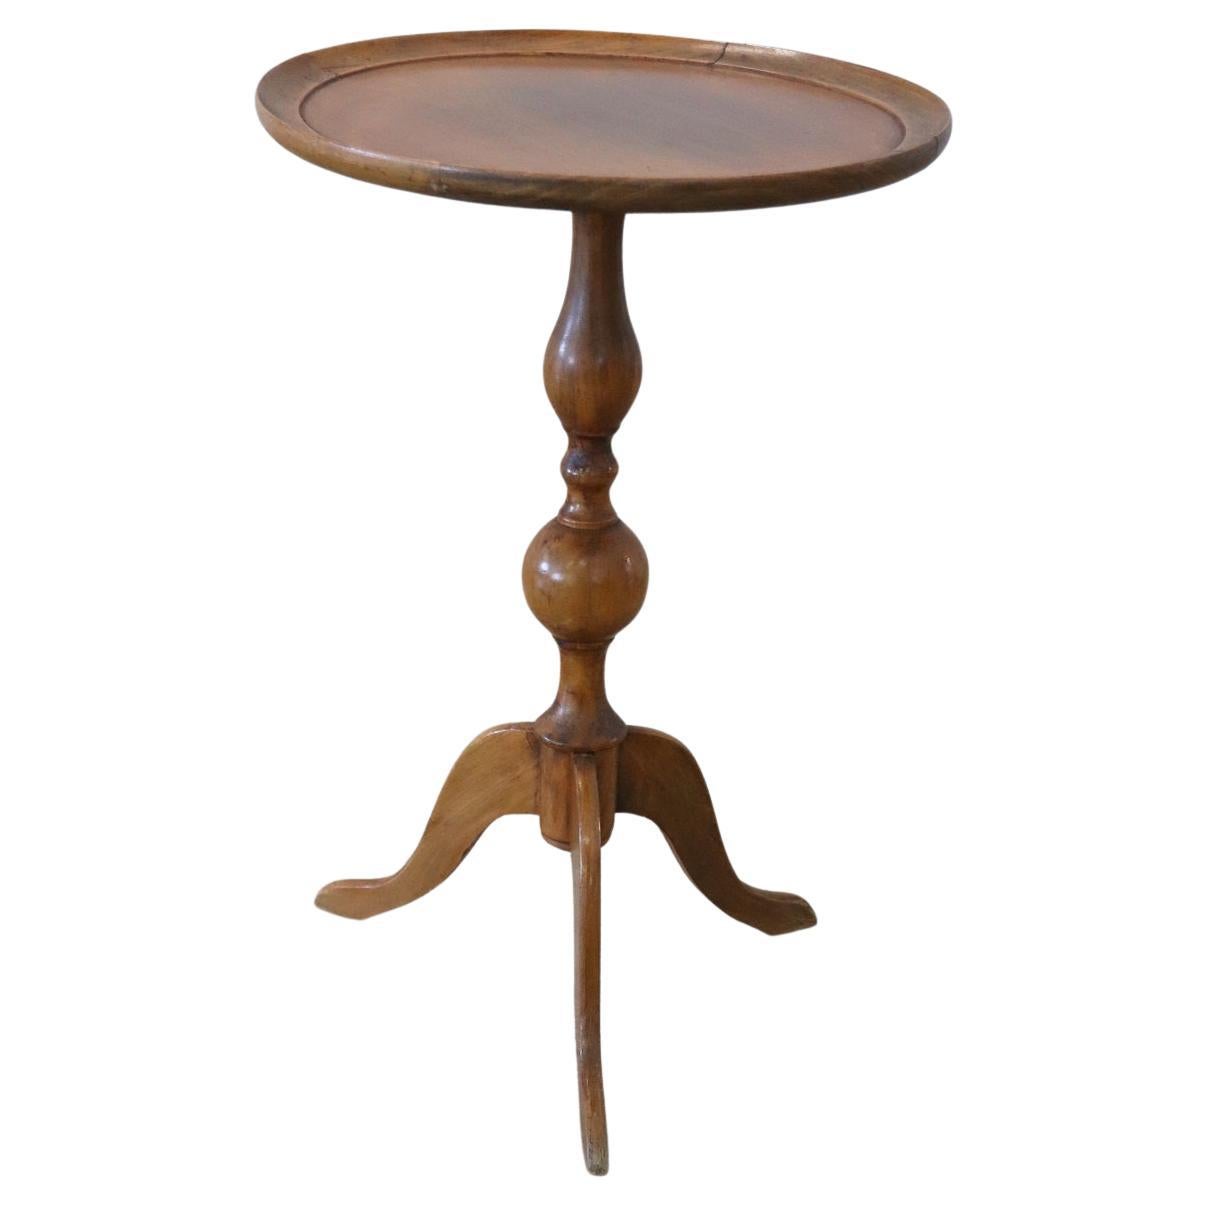 19th Century Italian L Philippe Beech Wood Round Pedestal Table or Smoking Table For Sale